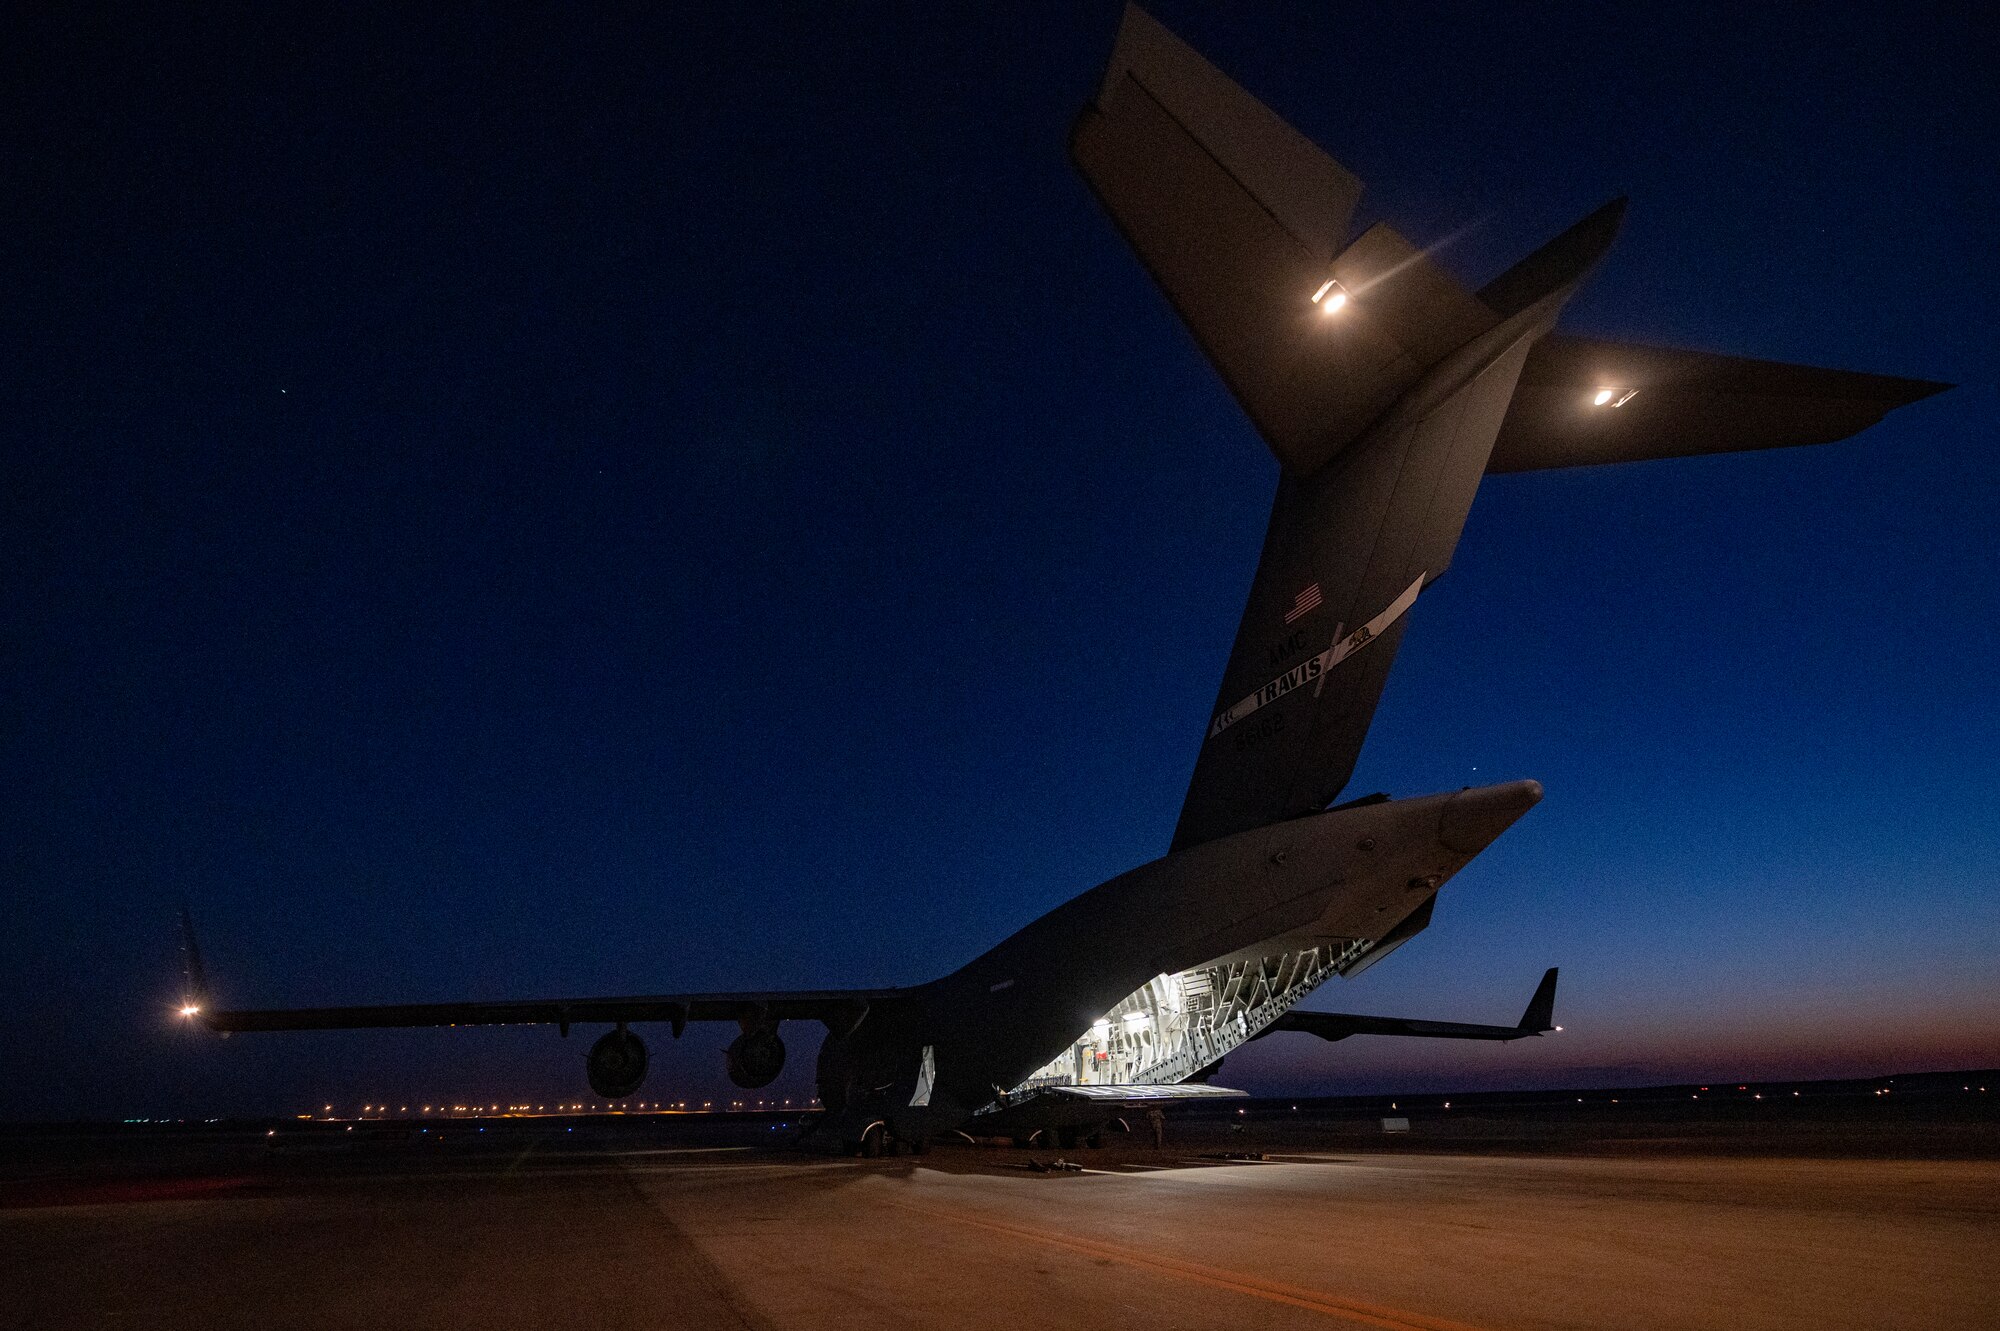 The C-17, from Travis Air Force Base, California, delivered equipment for the 26th Expeditionary Rescue Squadron in support of the 332nd Air Expeditionary Wing’s mission.